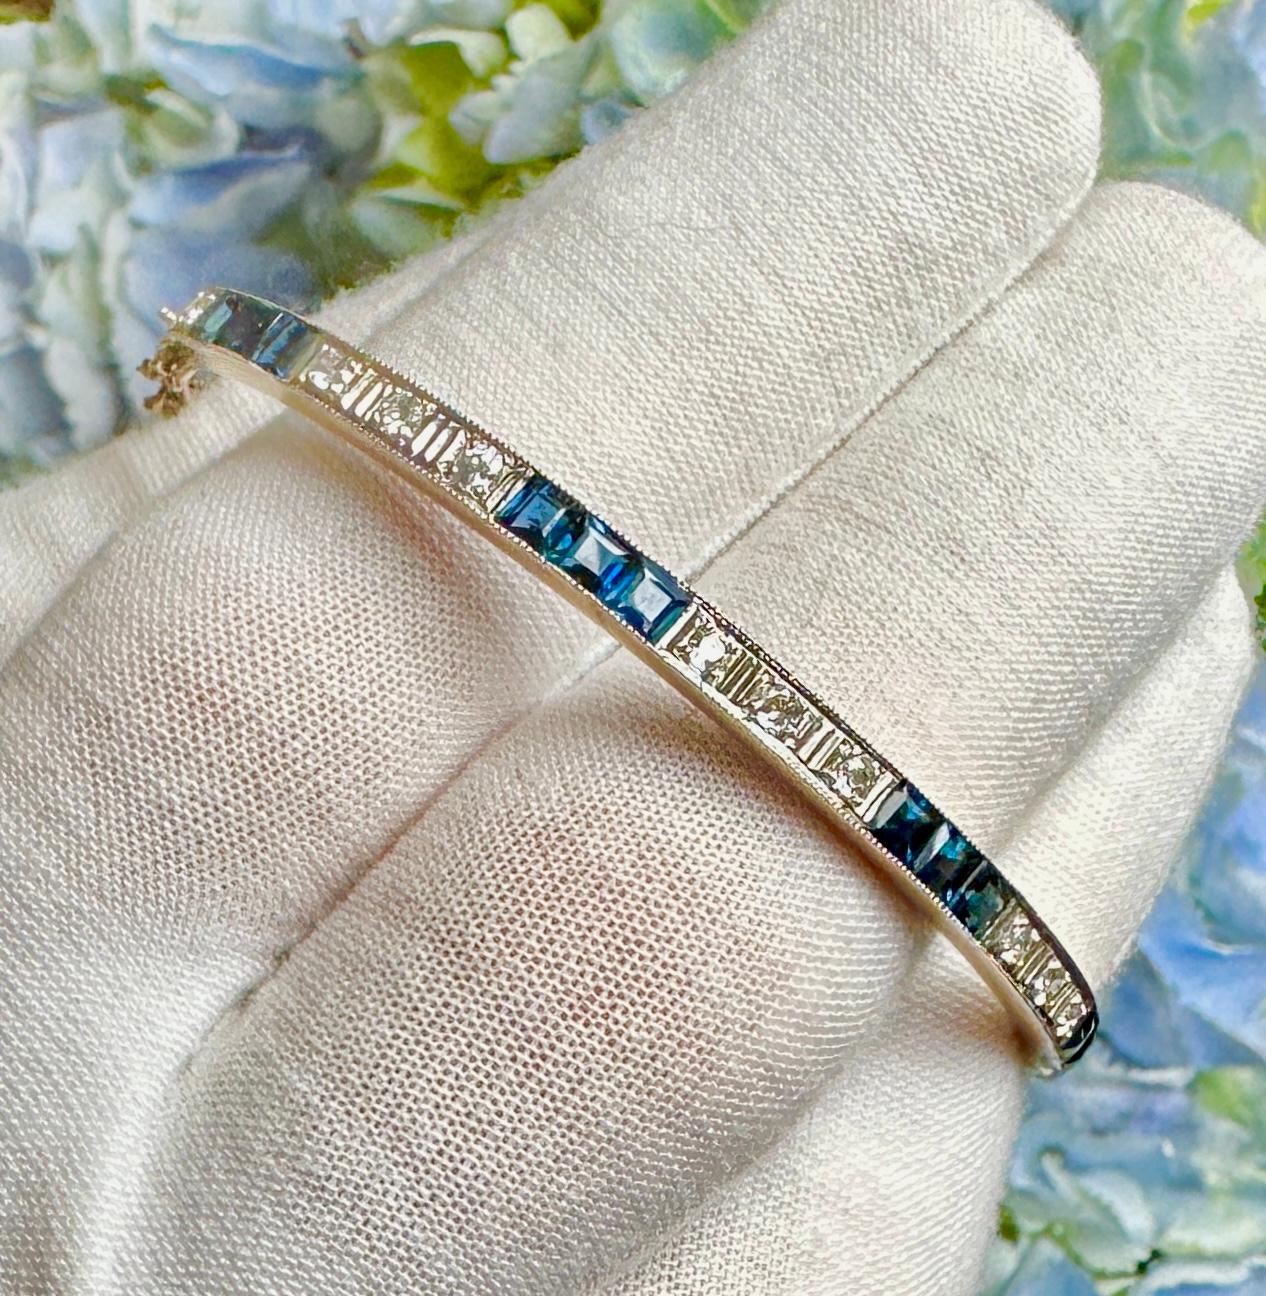 This is a gorgeous antique Art Deco Bangle Bracelet with 12 Square Cut Channel Set Sapphires and 11 Old Mine Cut Diamonds in 14 Karat White and Yellow Gold.  The elegant and classic design is exquisite.  The bracelet alternates groups of three